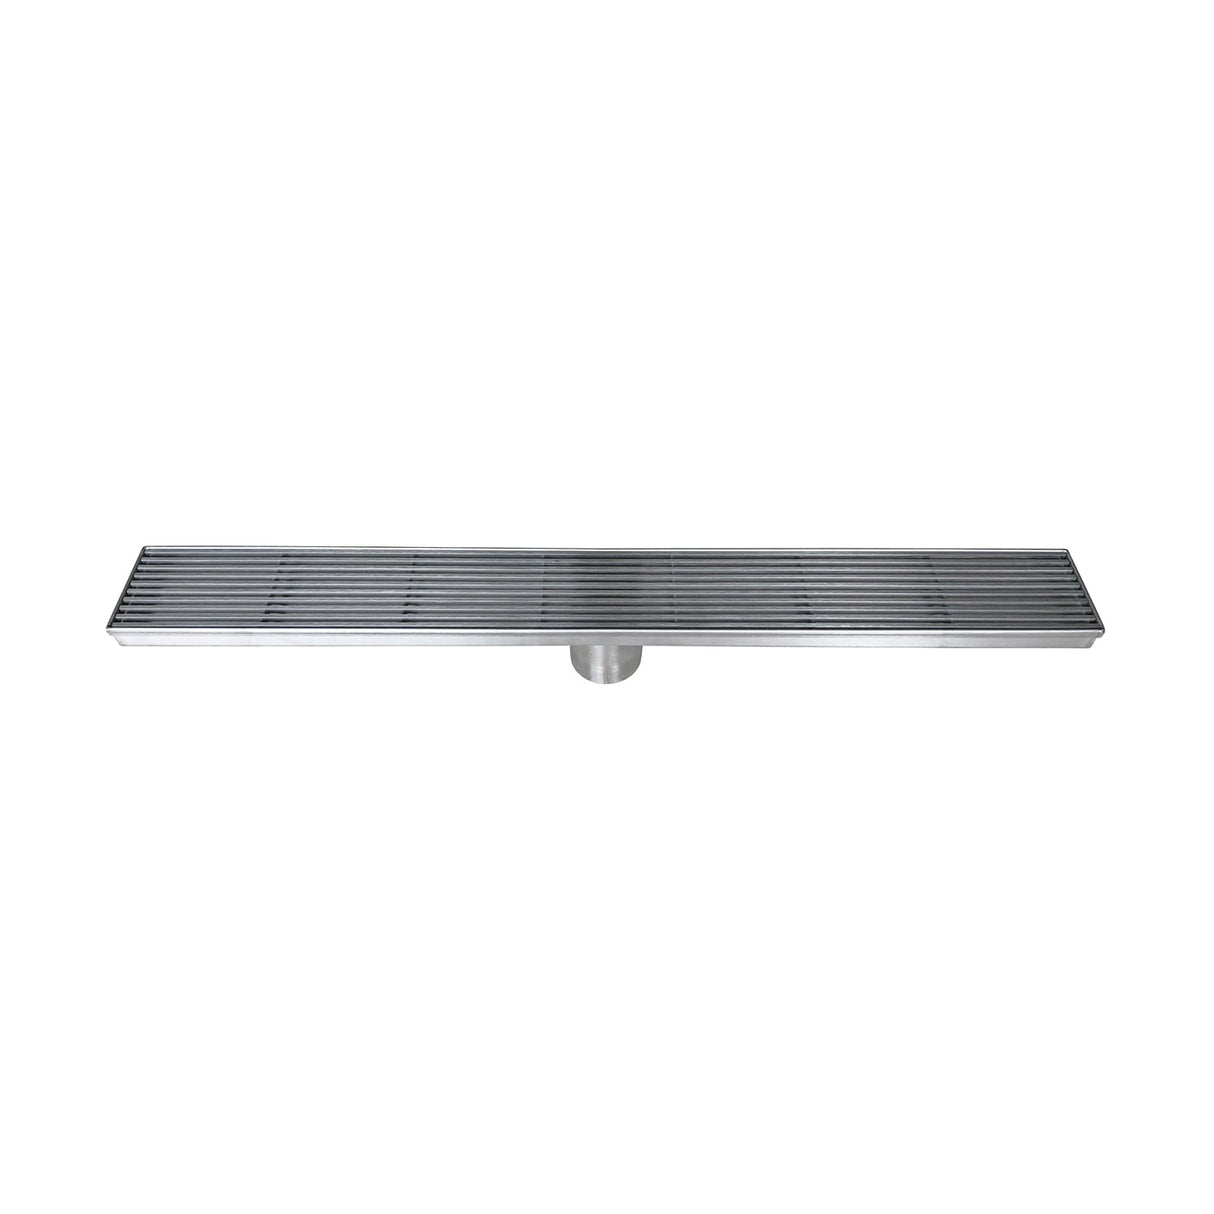 DAX Stainless Steel Rectangular Shower Floor Drain with 18 Gauge, 24", Brushed Stainless Steel DR24-H01